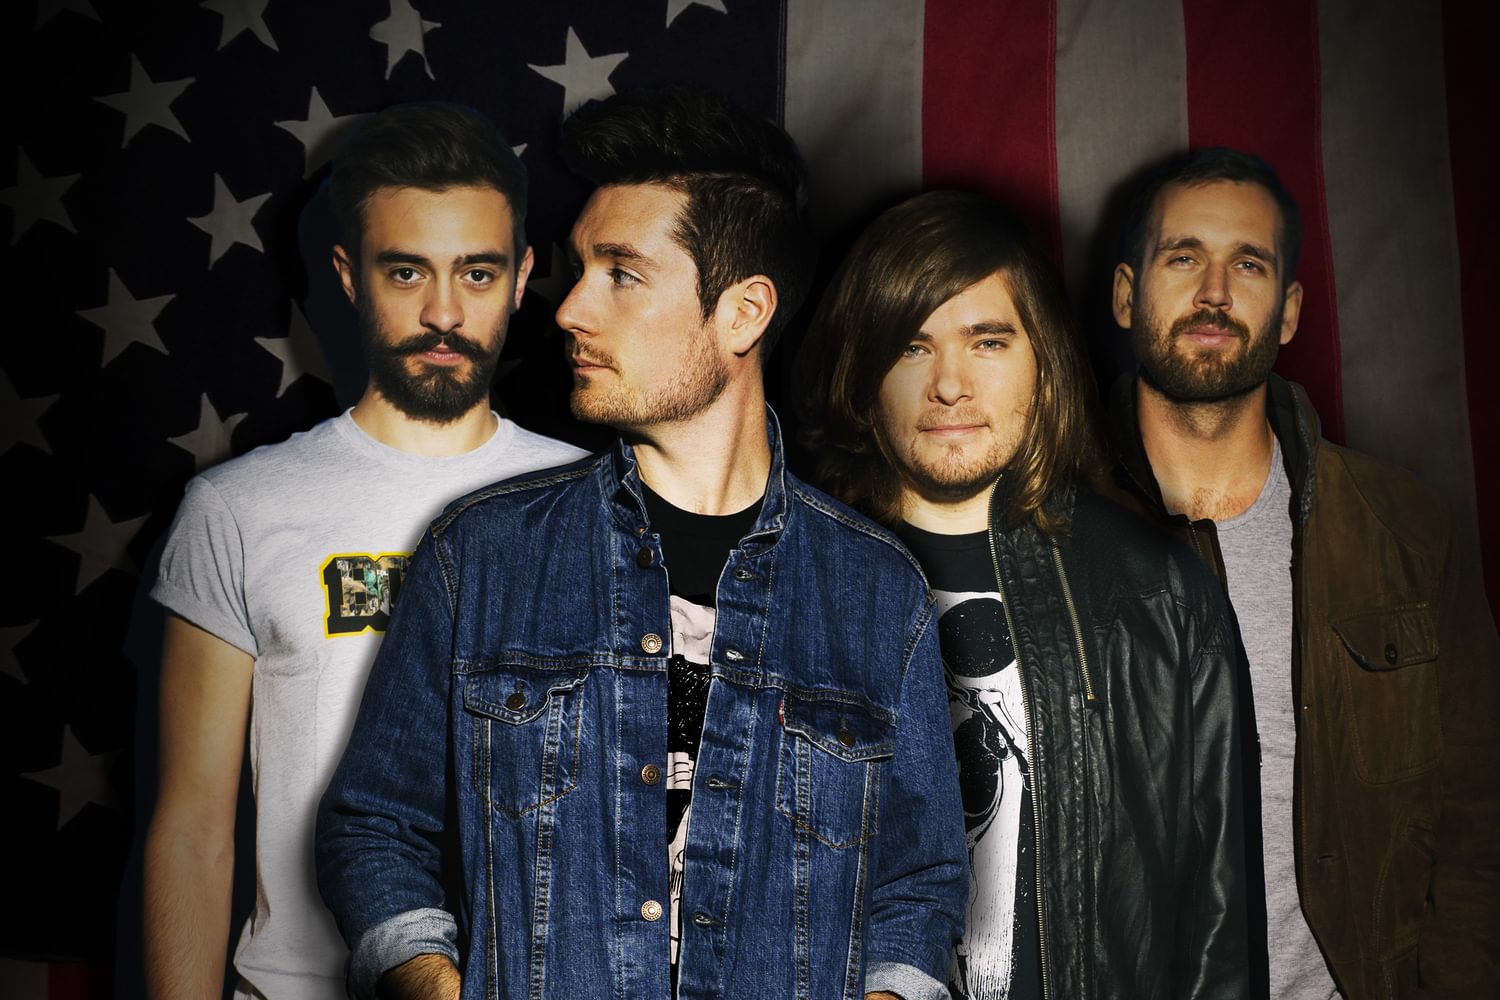 New issue of DIY out now, feat. Bastille, Superfood, Foo Fighters & more